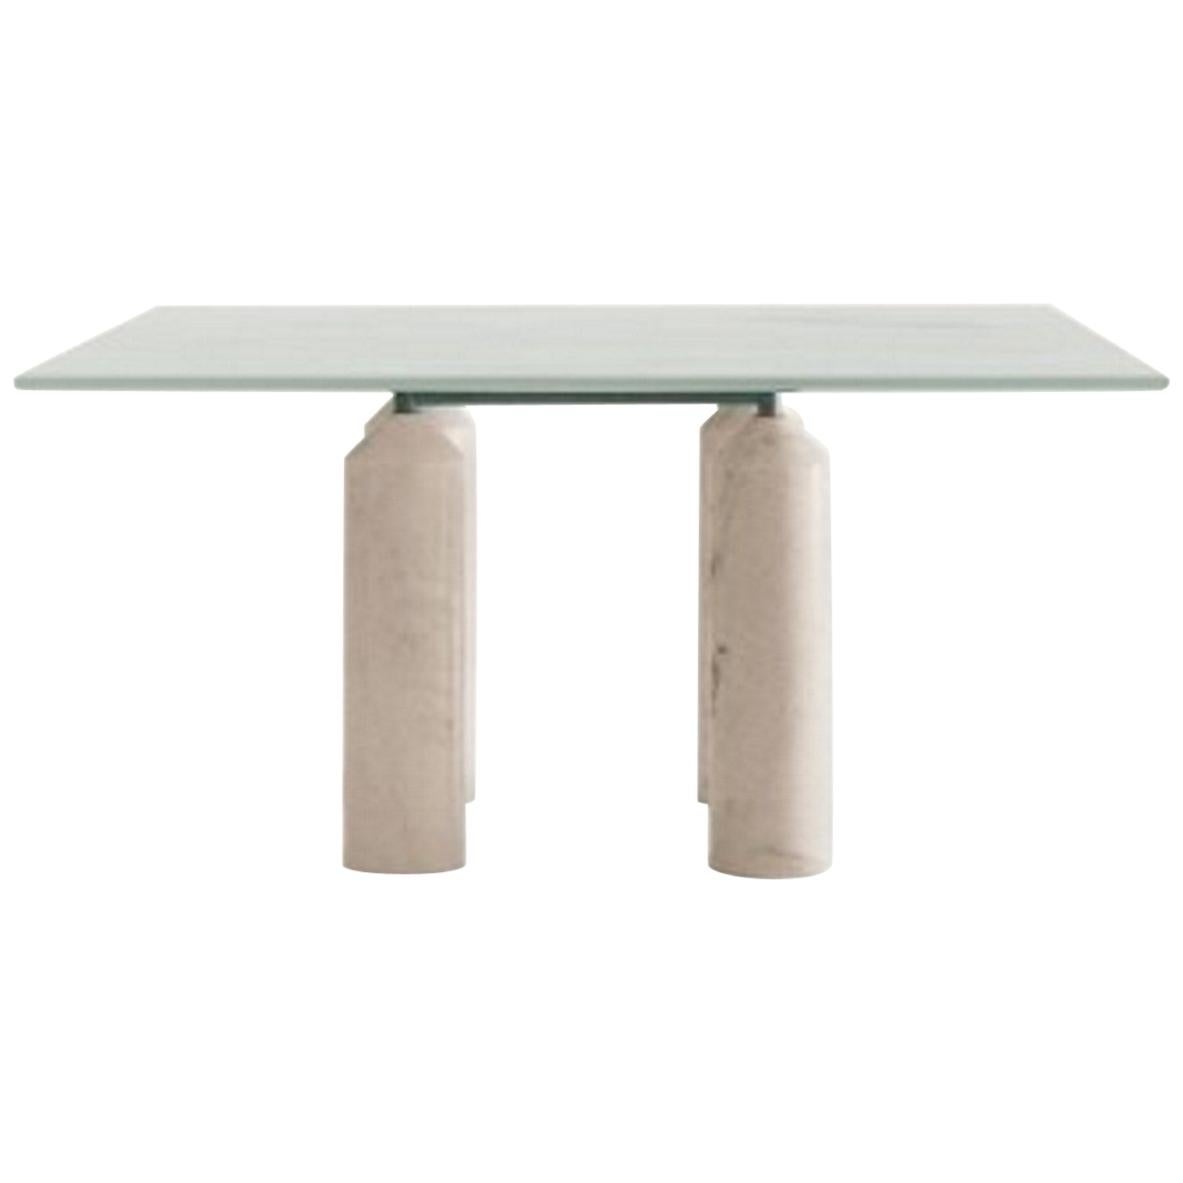 Large Square Dining Table White Marble and Travertine, Sormani, Italy, 1981